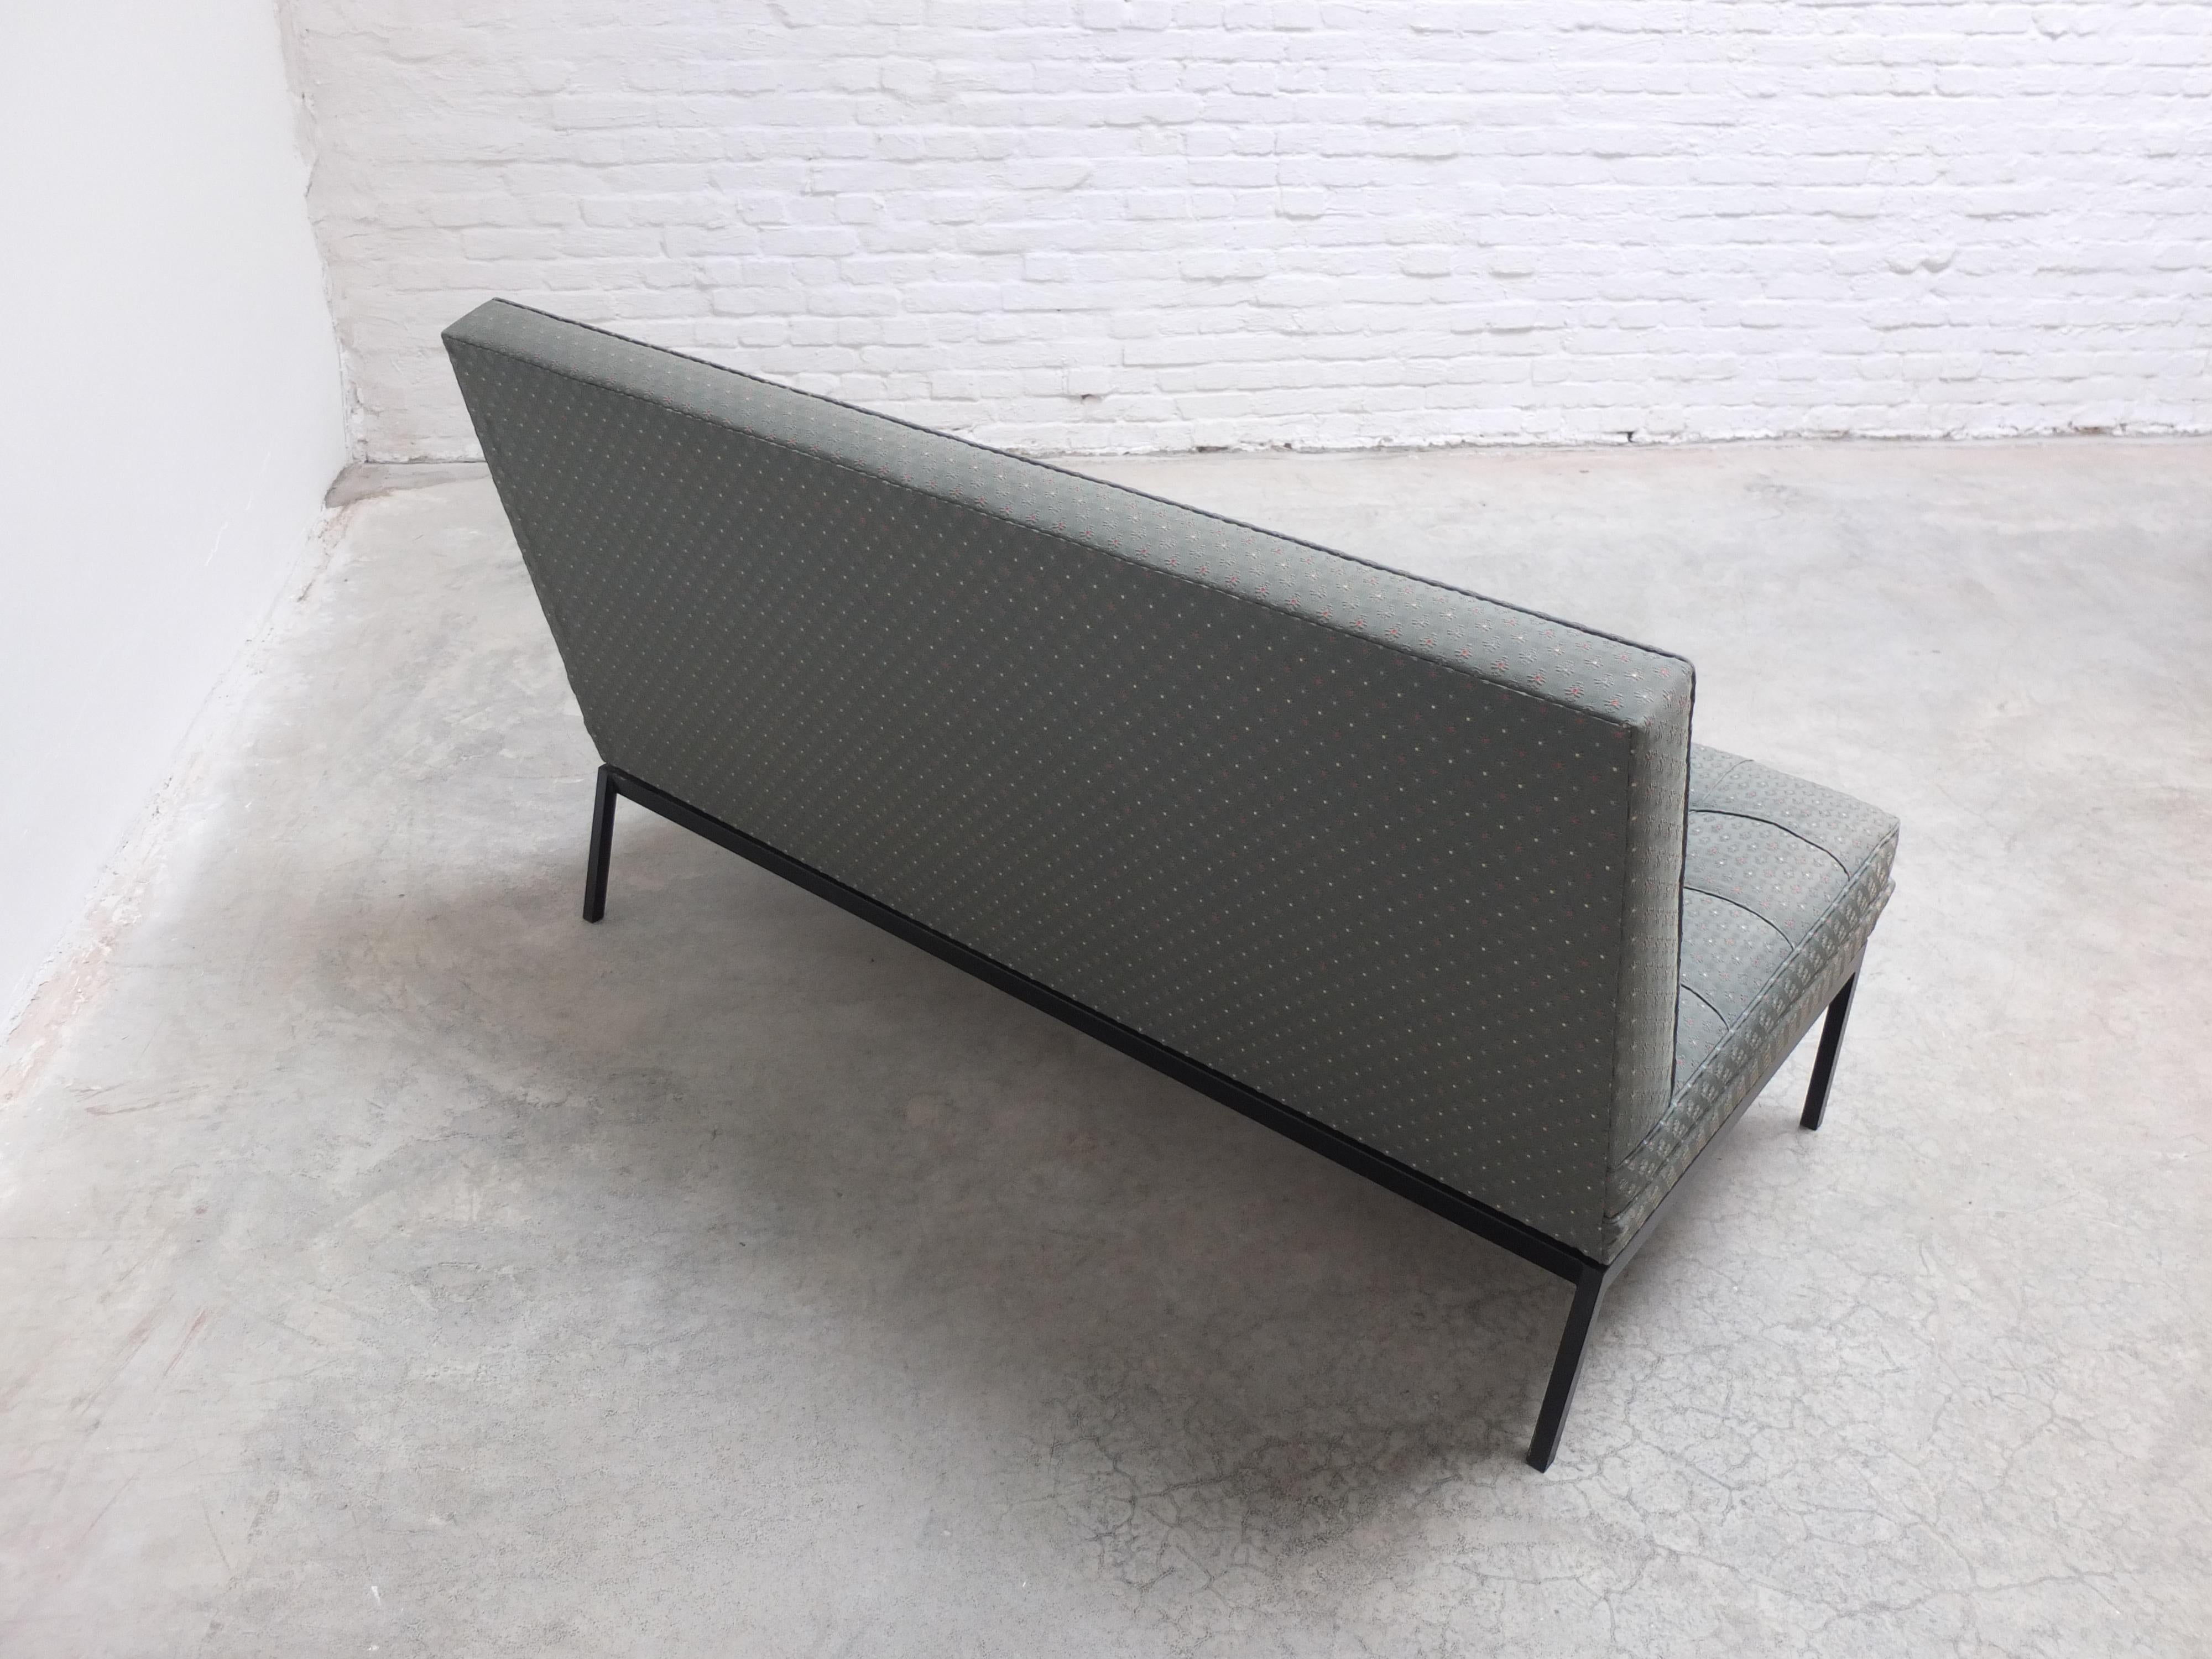 Steel Rare 'Model 66' 2-Seater Sofa by Florence Knoll for Knoll International, 1950s For Sale